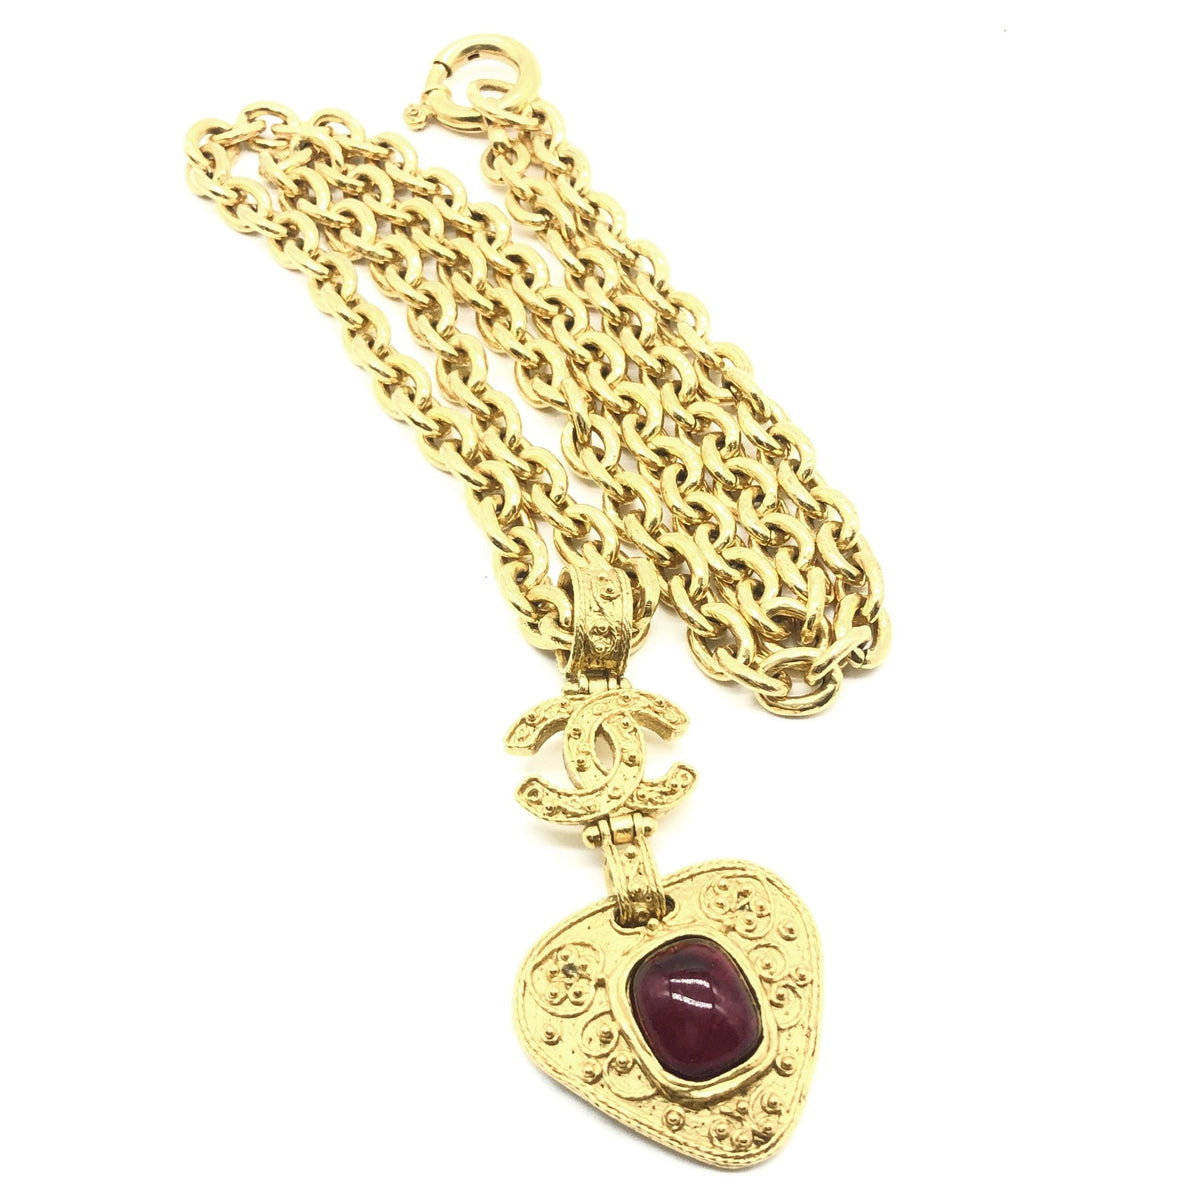 Vintage Chanel Red Heart Pendant Necklace – Very Vintage